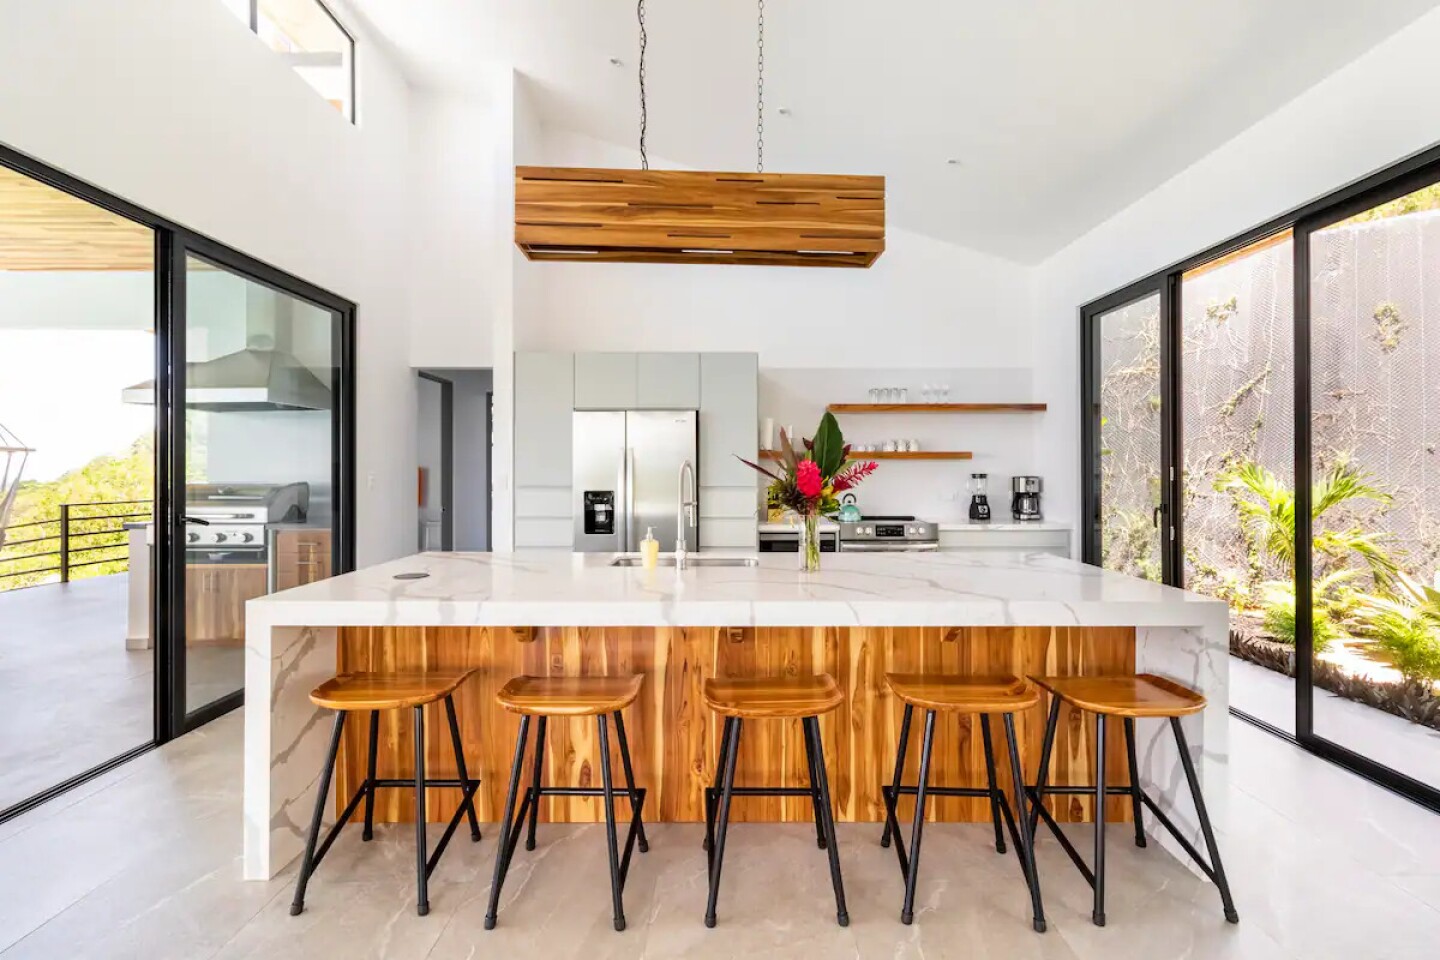 <a>The kitchen is a stylish gathering space in this minimalist design home.</a>